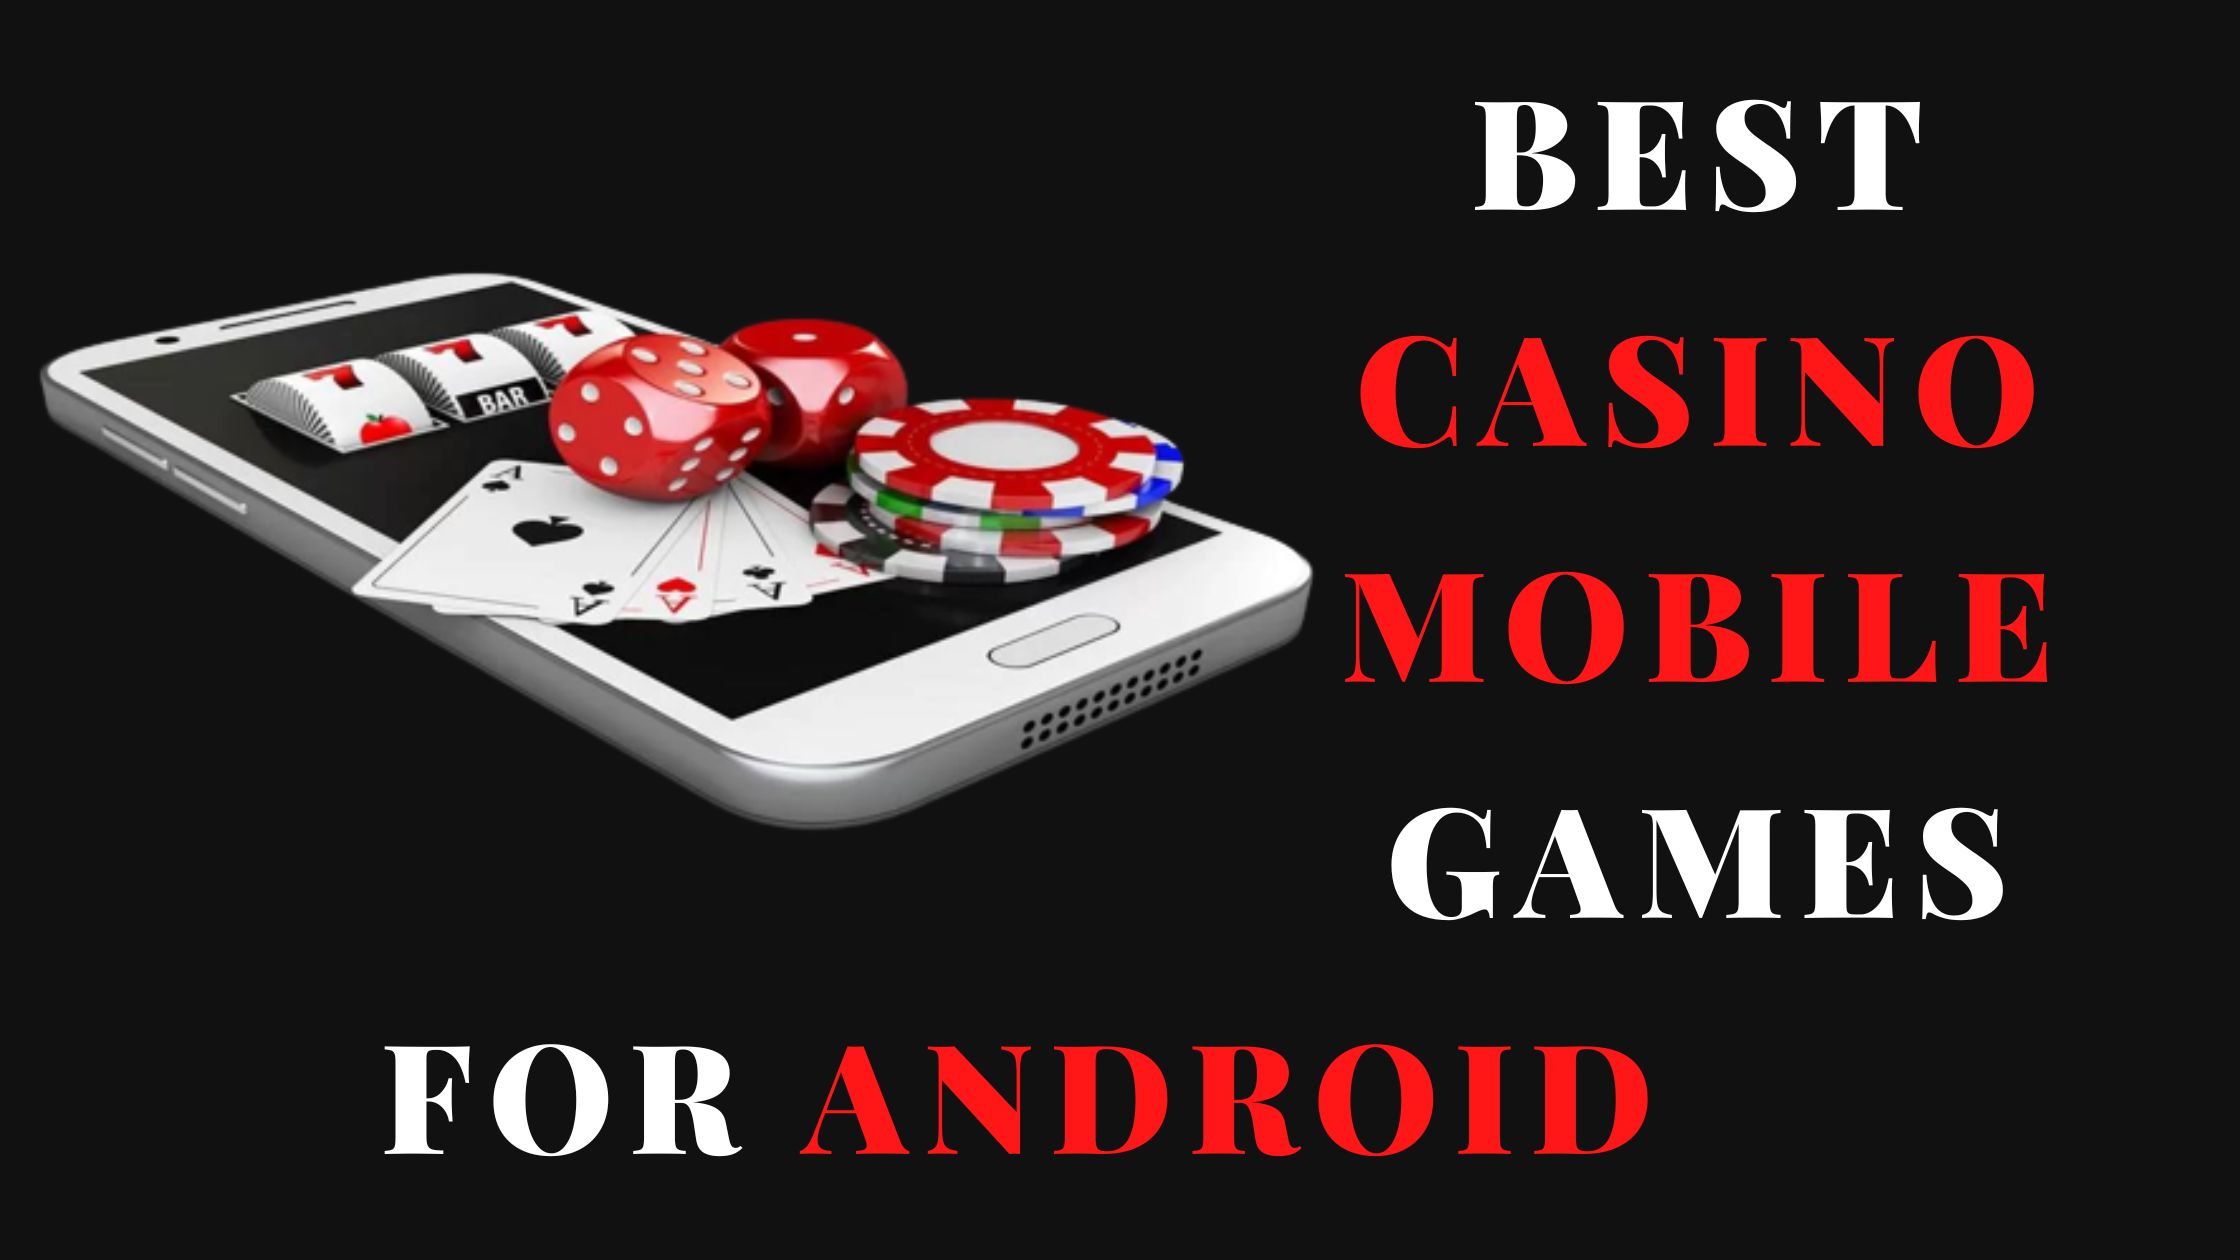 6 Best Casino Mobile Games For Android